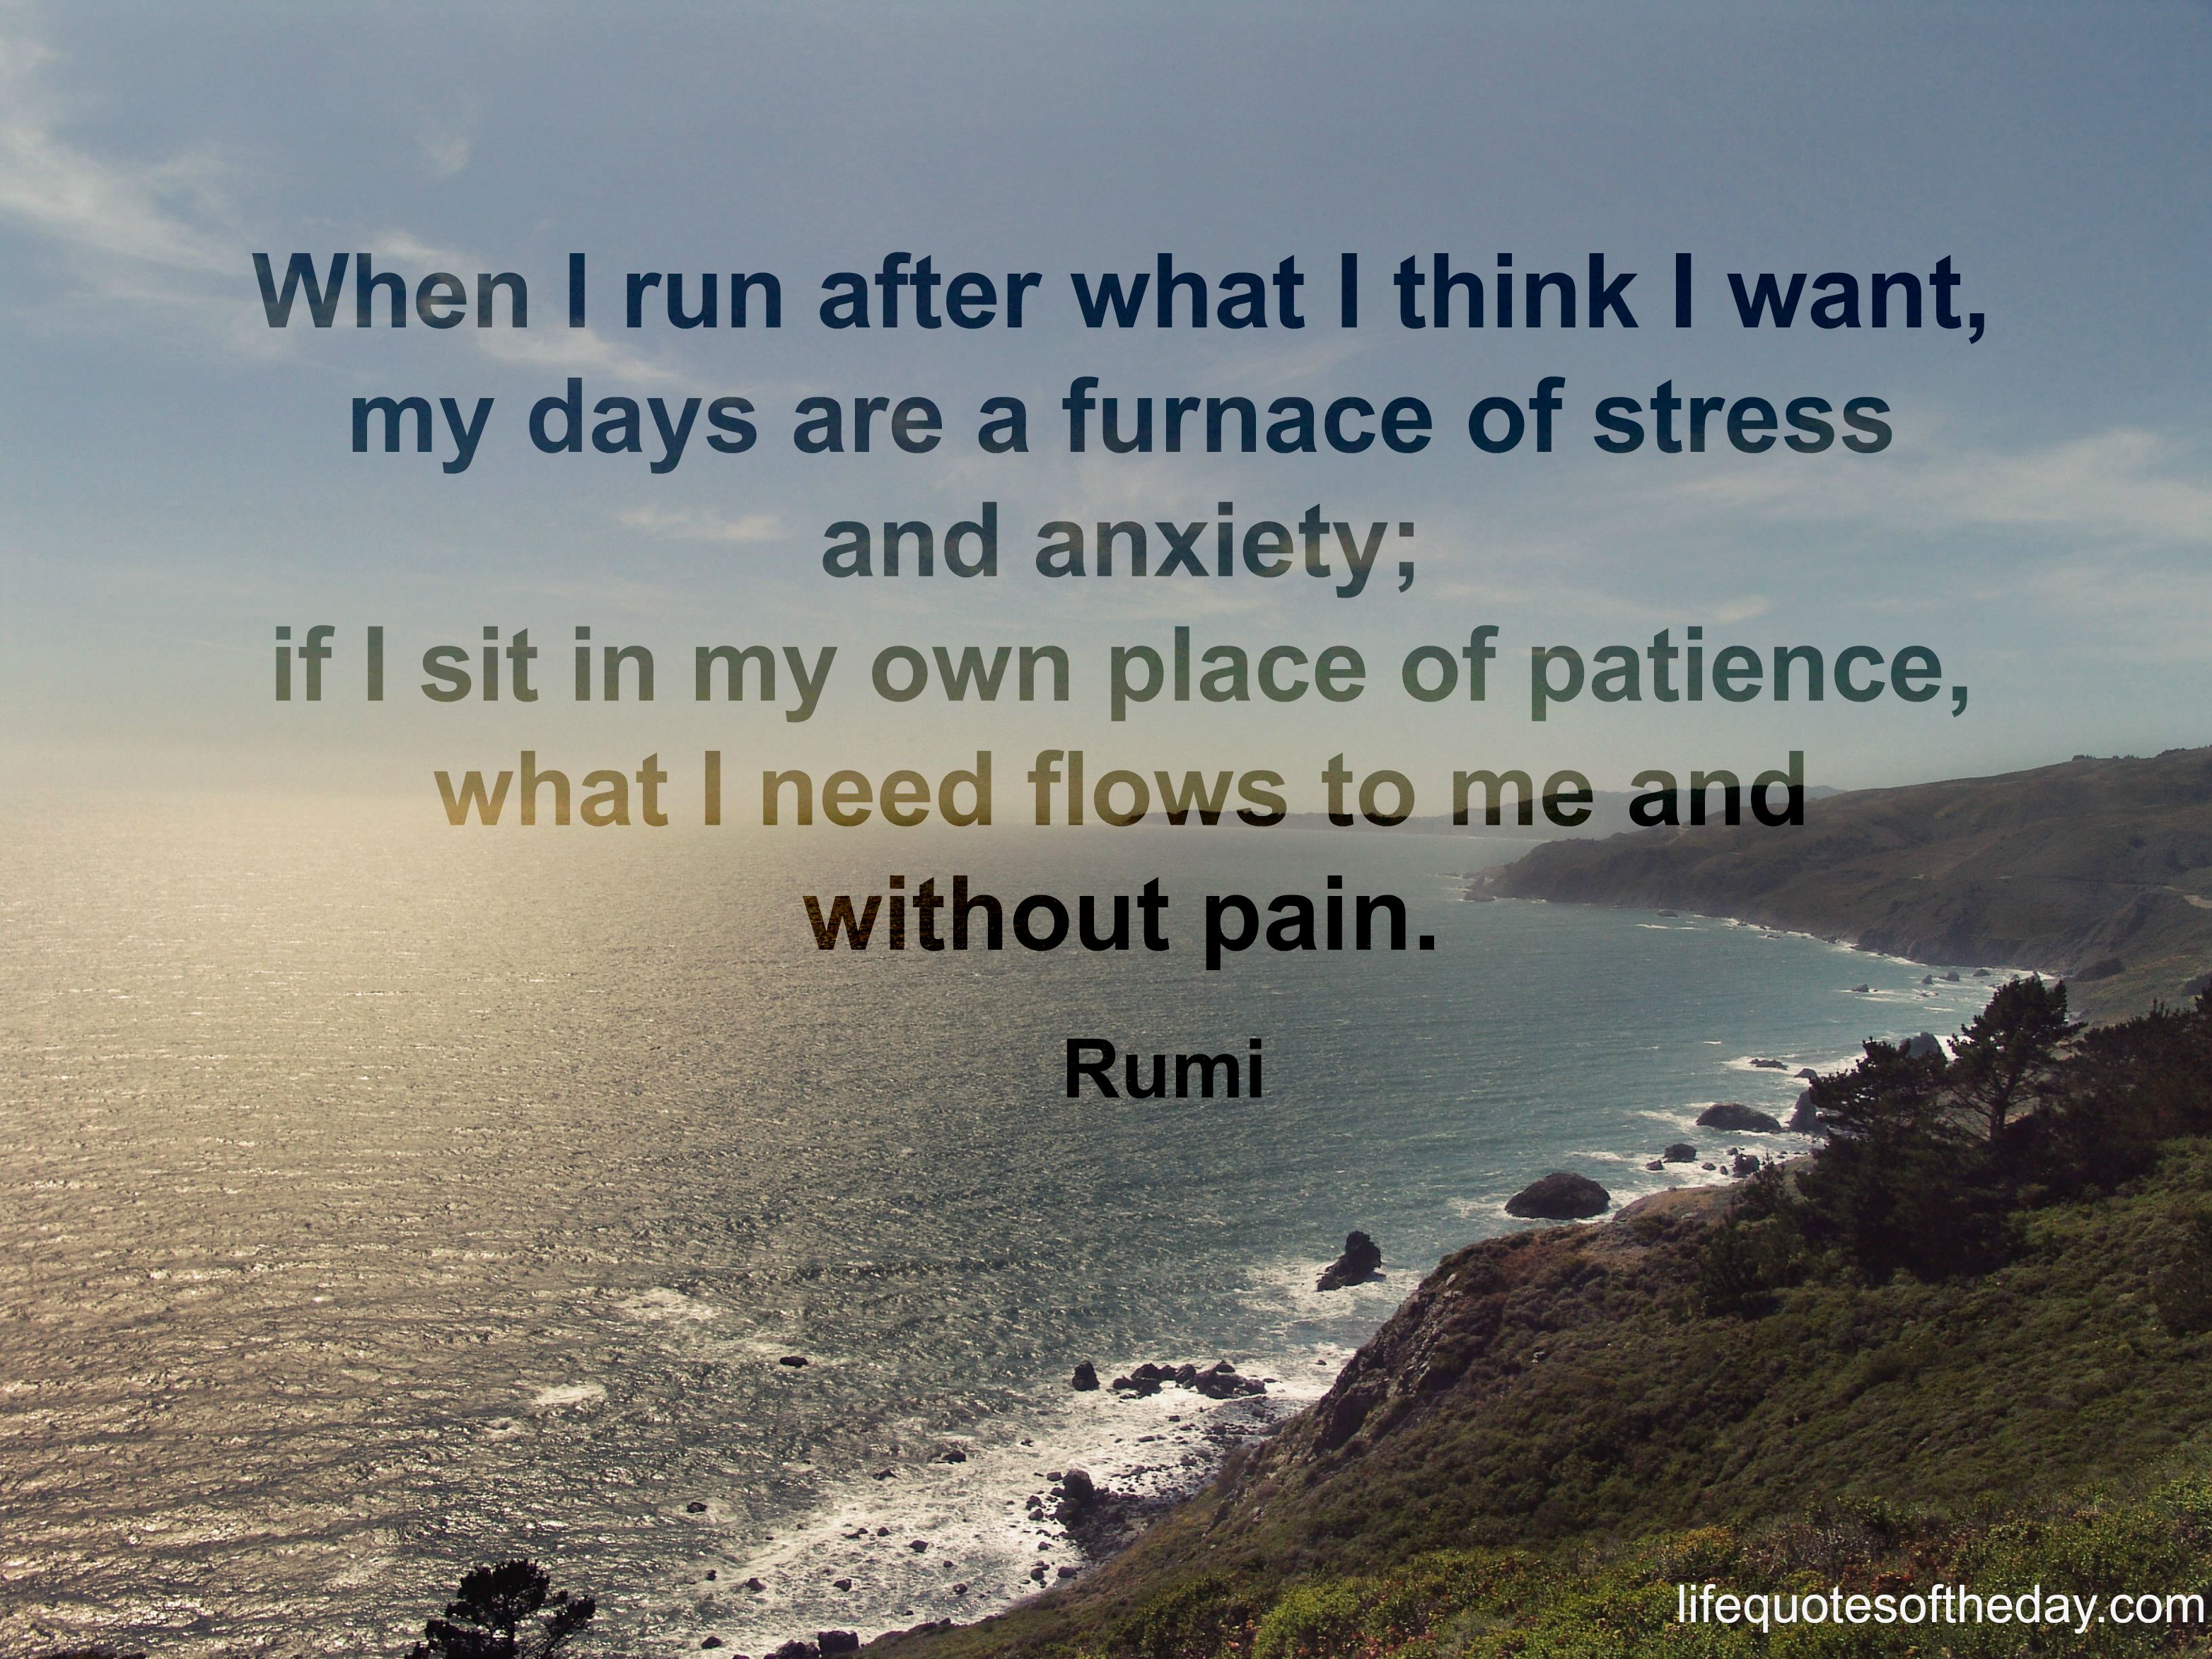 Rumi Quotes Of The Day. QuotesGram